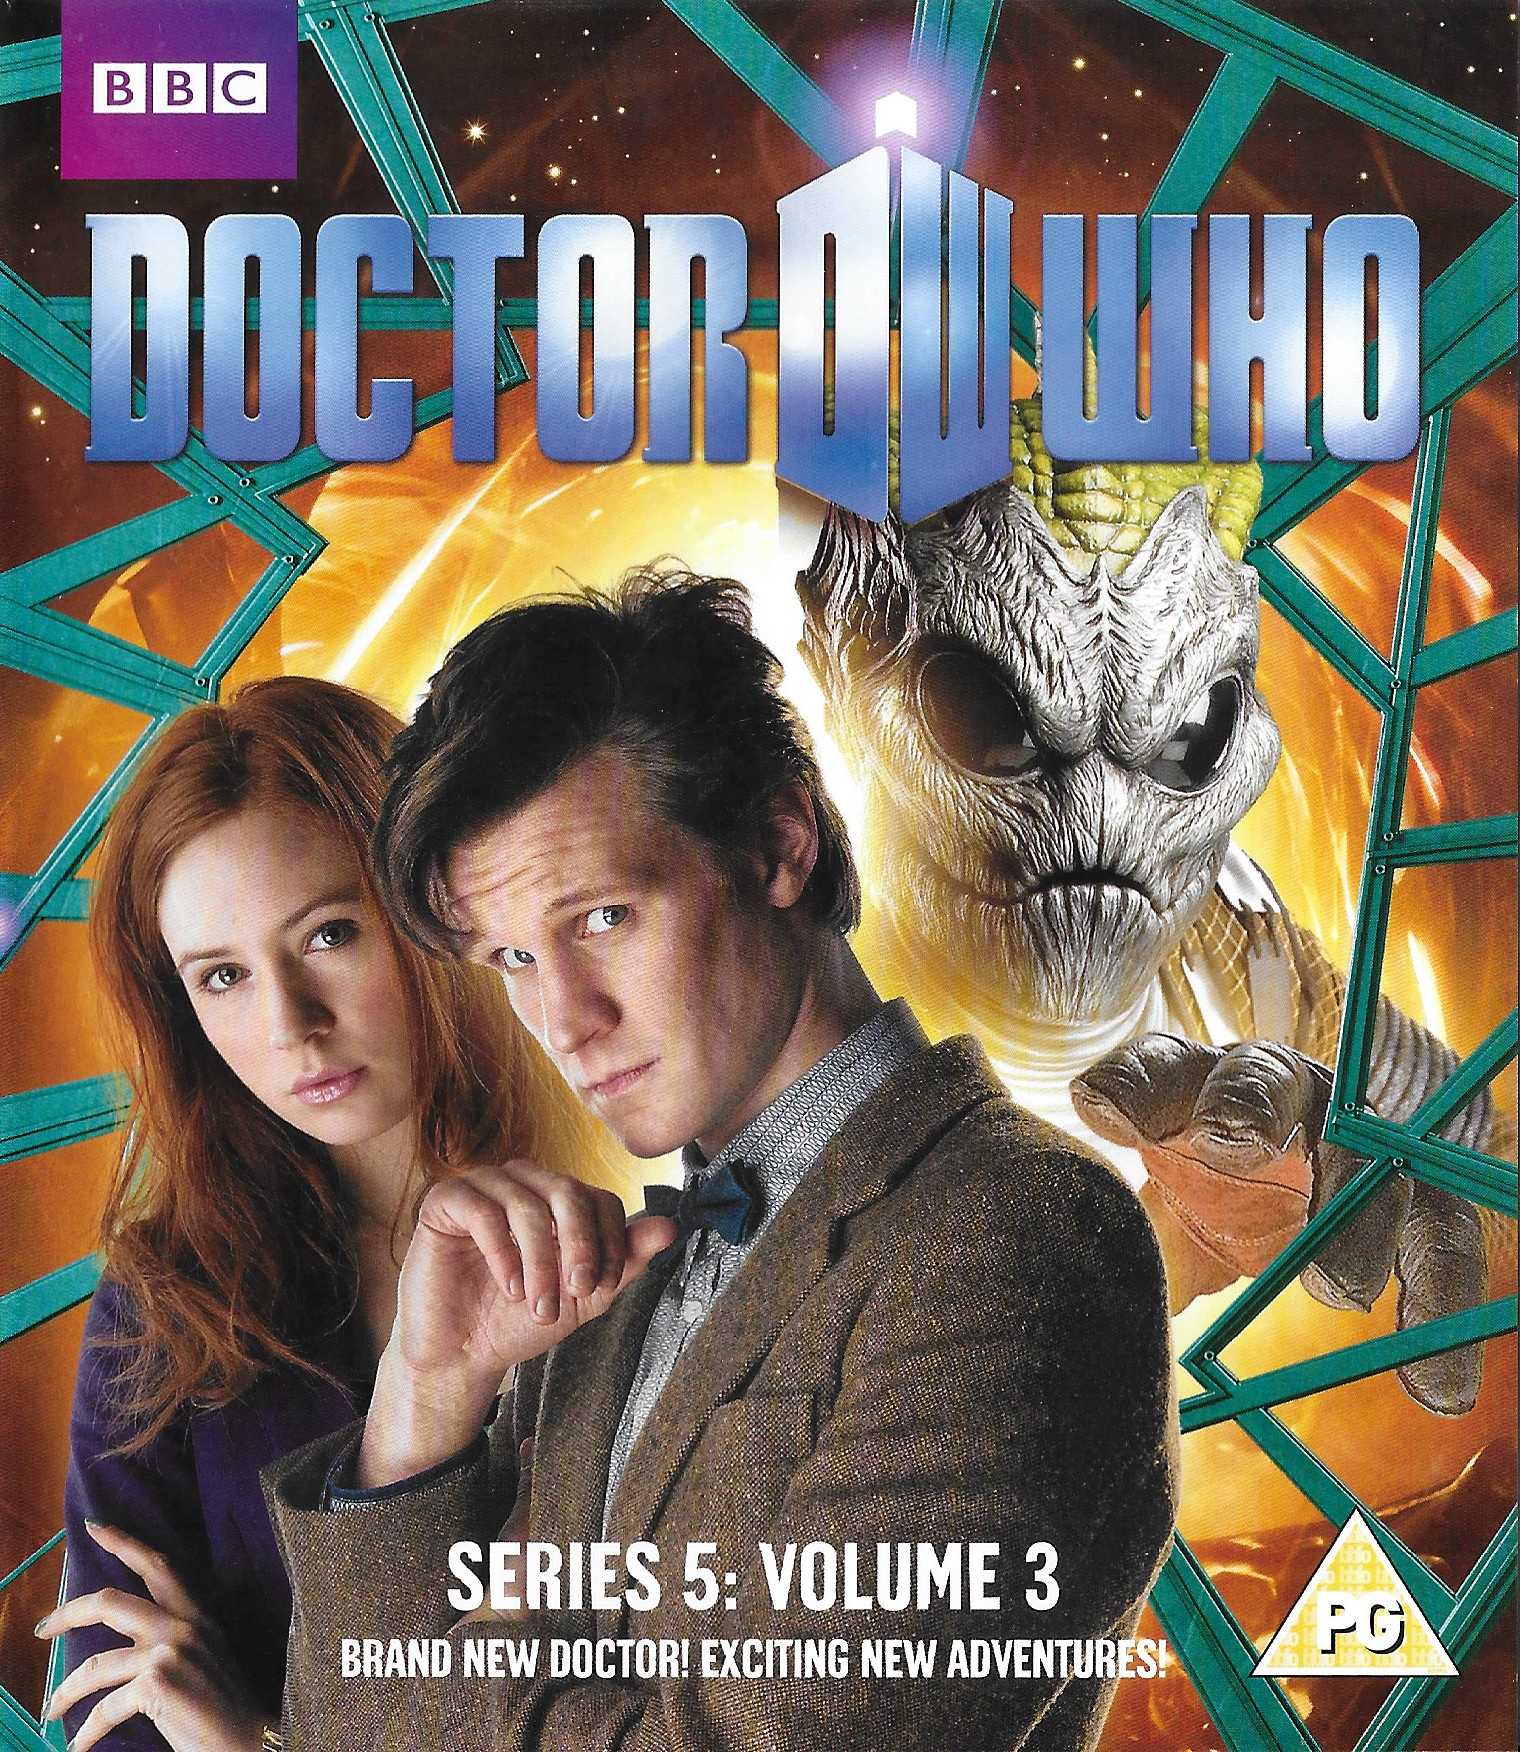 Picture of BBCBD 0084 Doctor Who - Series 5, volume 3 by artist Simon Nye / Chris Chibnall from the BBC blu-rays - Records and Tapes library